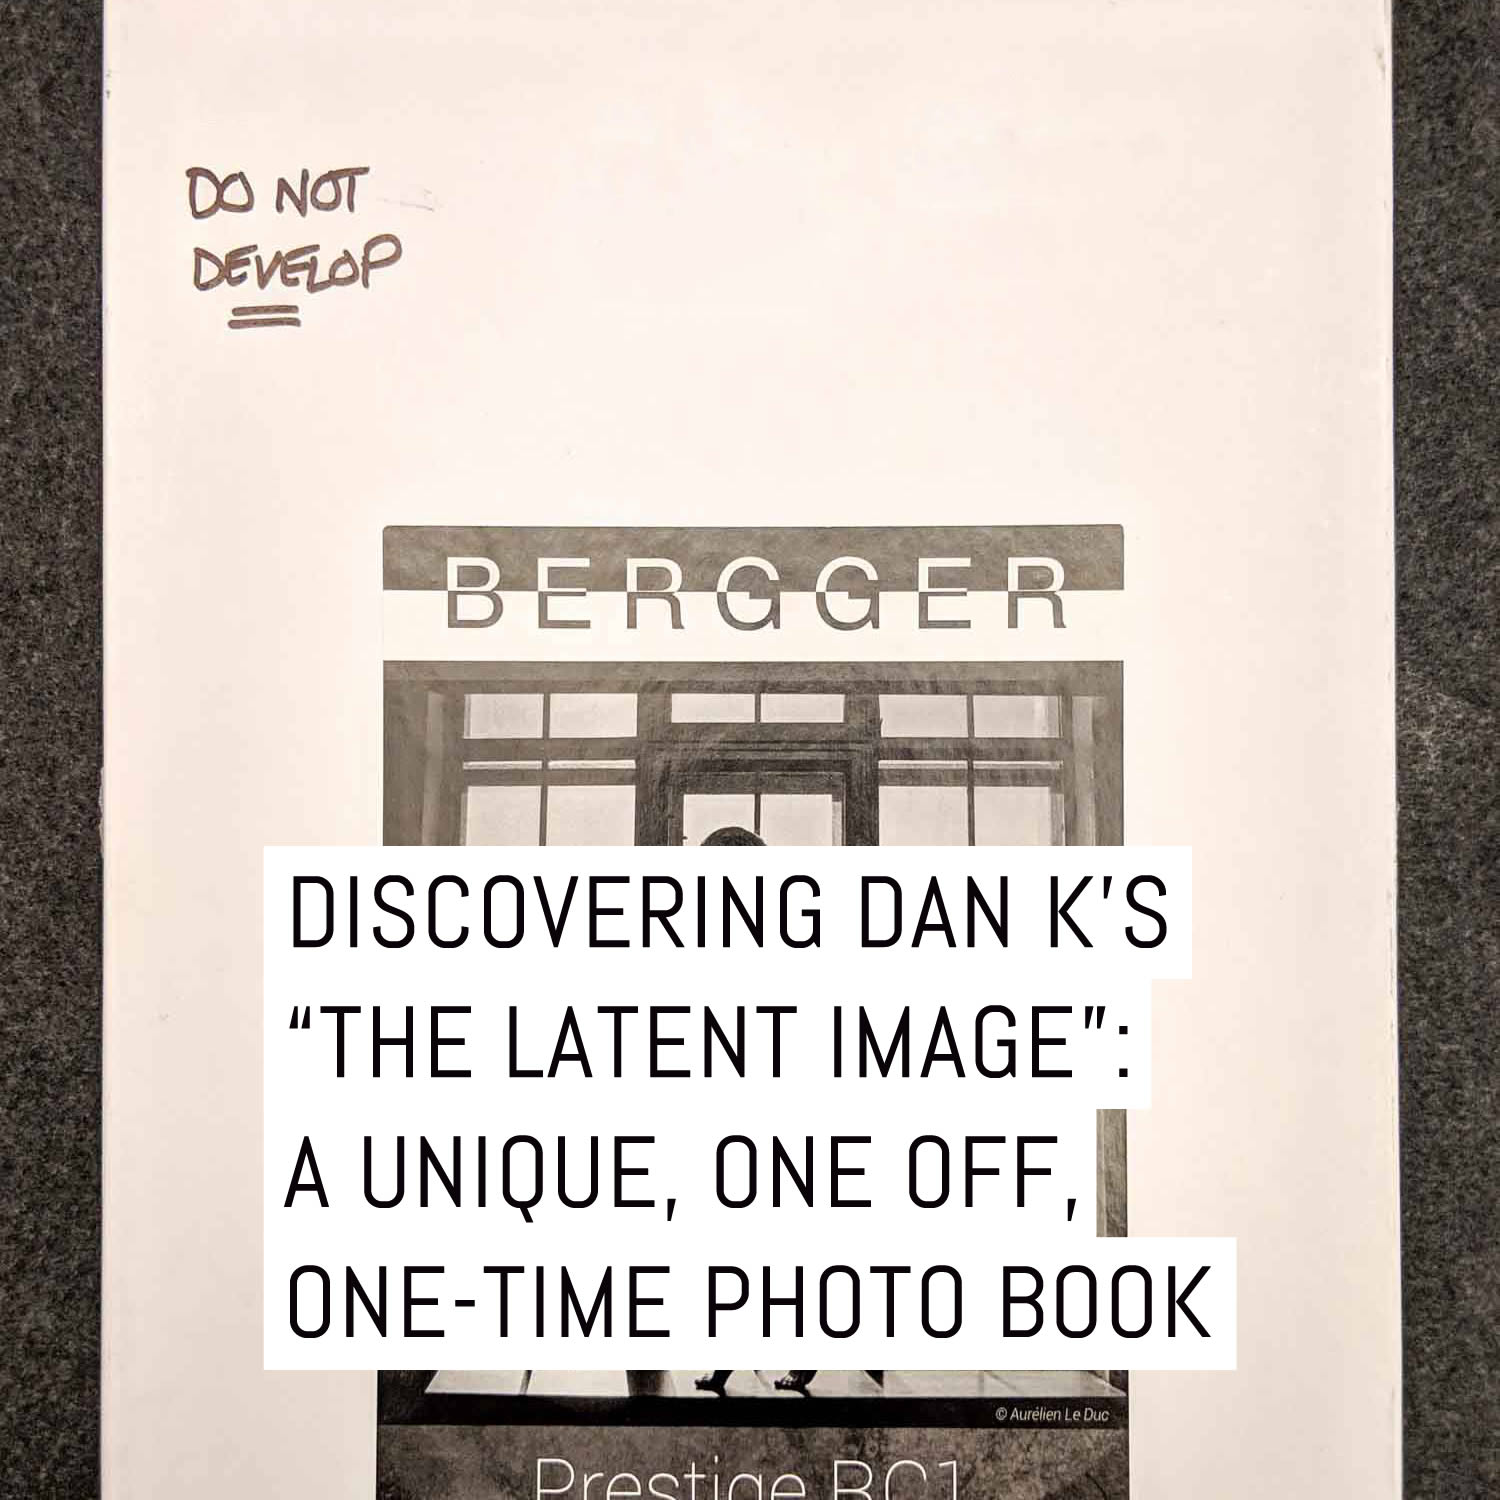 Discovering Dan K’s “THE LATENT IMAGE”: a unique one-off, one-time photo book